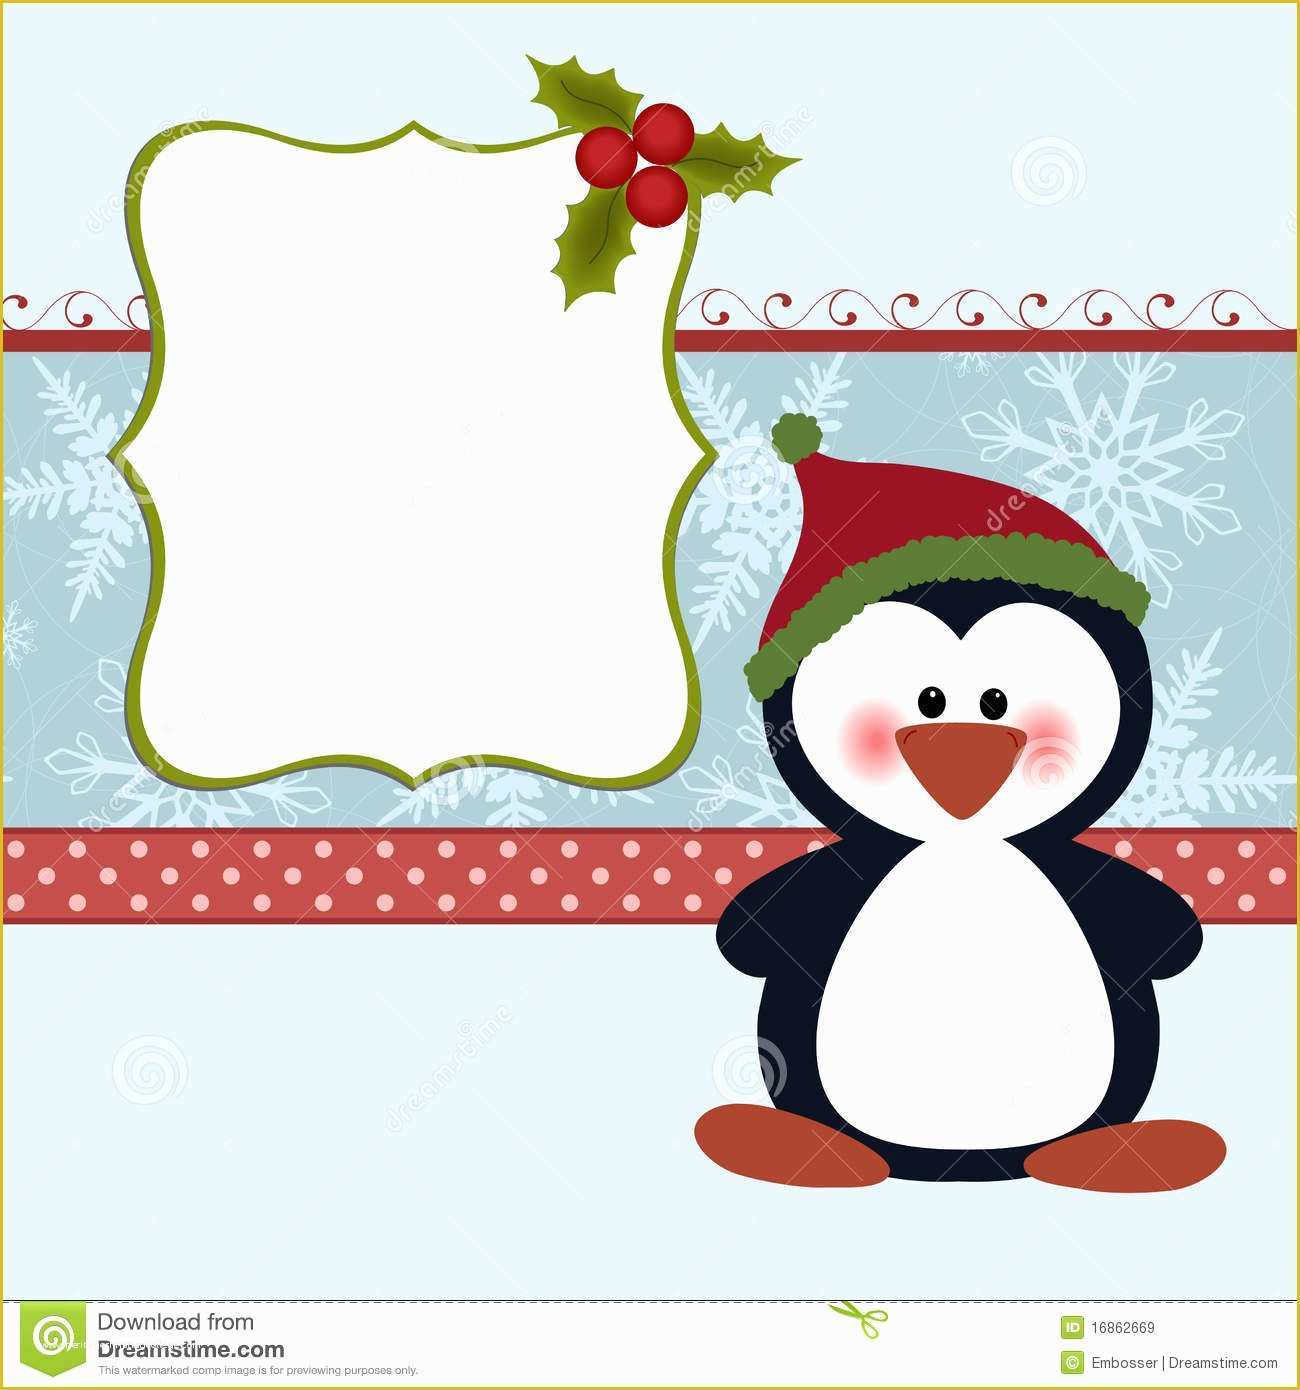 Free Christmas Greeting Card Templates Of Blank Template for Christmas Greetings Card Royalty Free